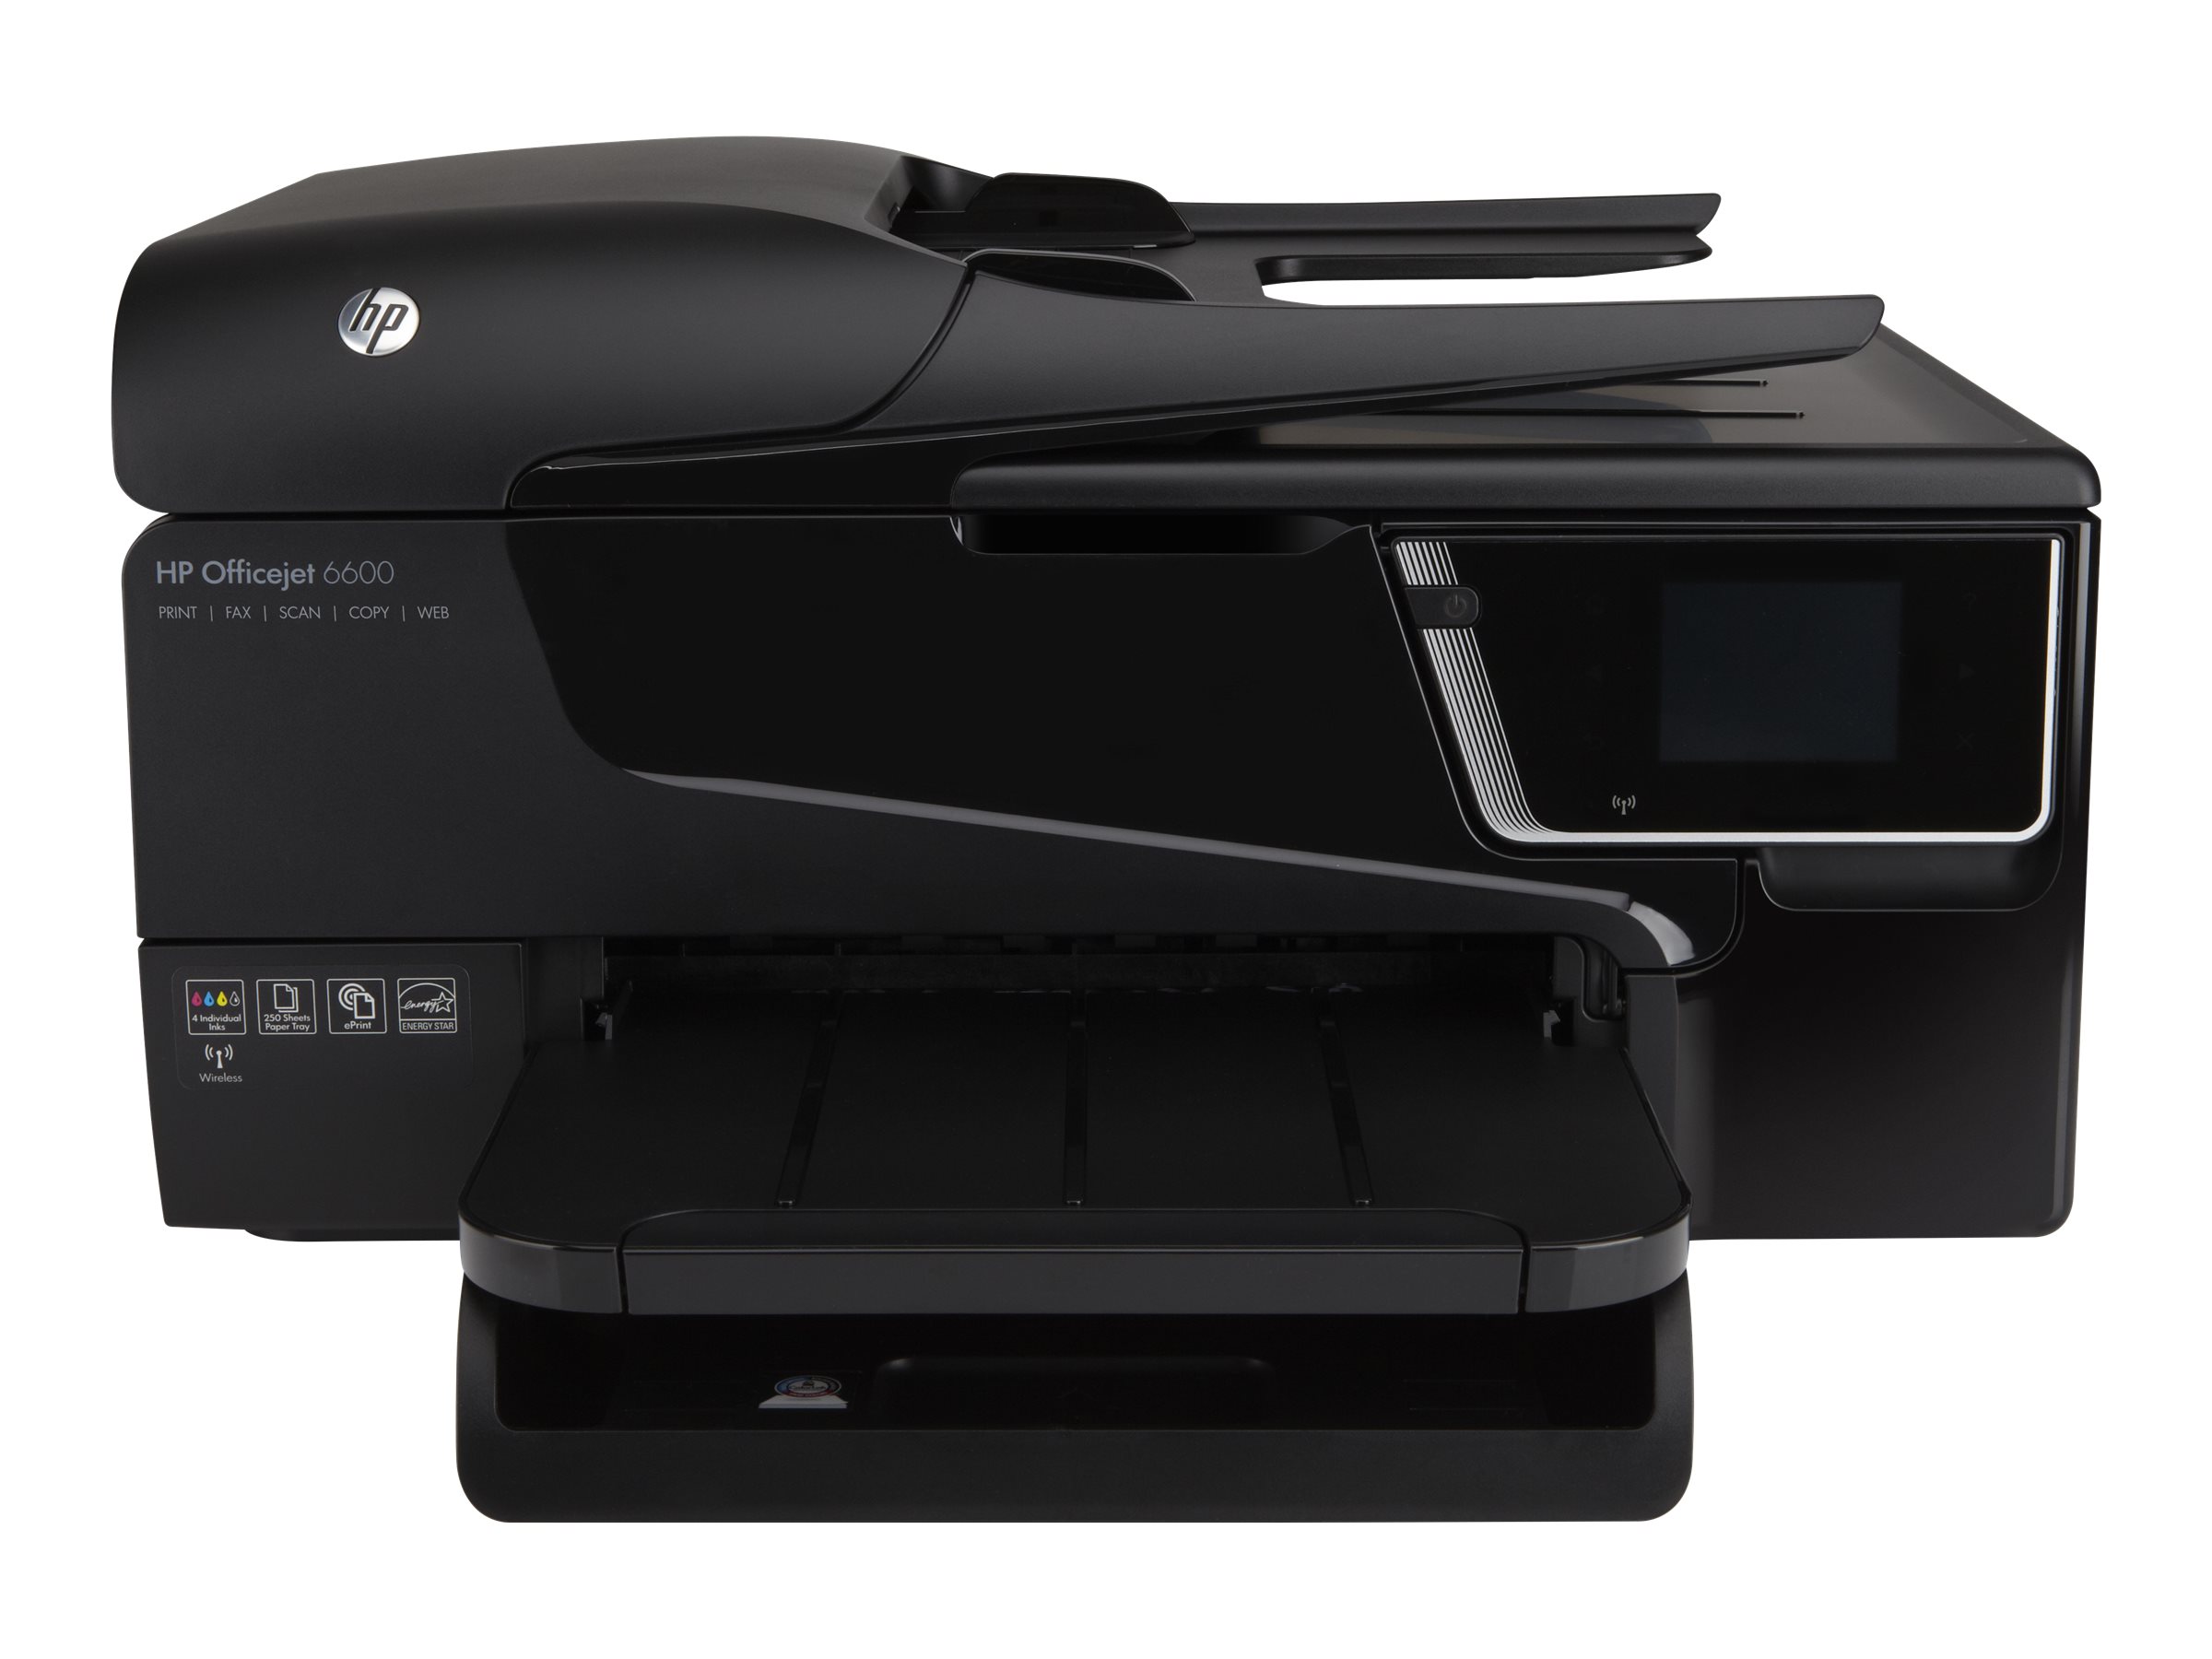 HP Officejet 6600 e-All-in-One H711a - Multifunction printer - color - ink-jet - Legal (8.5 in x 14 in)/A4 (8.25 in x 11.7 in) (original) - Legal (media) - up to 32 ppm (copying) - up to 14 ppm (printing) - 250 sheets - 33.6 Kbps - USB 2.0, Wi-Fi(n) - image 4 of 8